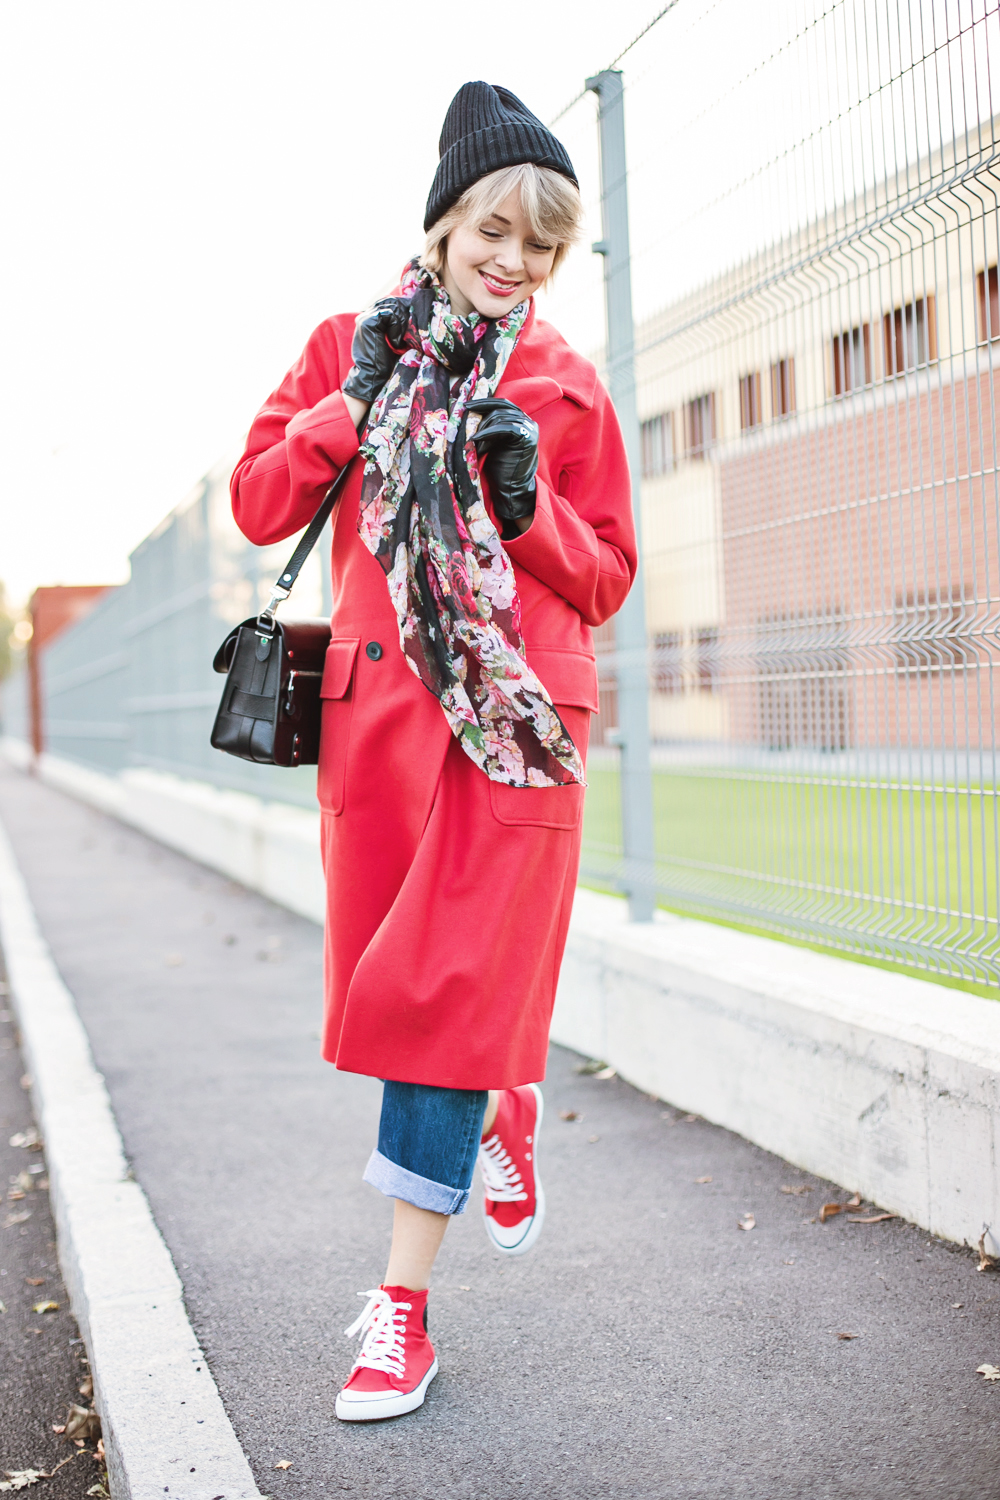 darya kamalova thecablook fashion blog russian blogger italy moda street style pixie short hair fashion blogger asos red long coat boyfriend beanie stunning gloves roses scarf jeand levis proenza schouler ps11 bag cheap monday sneakers-17 копия